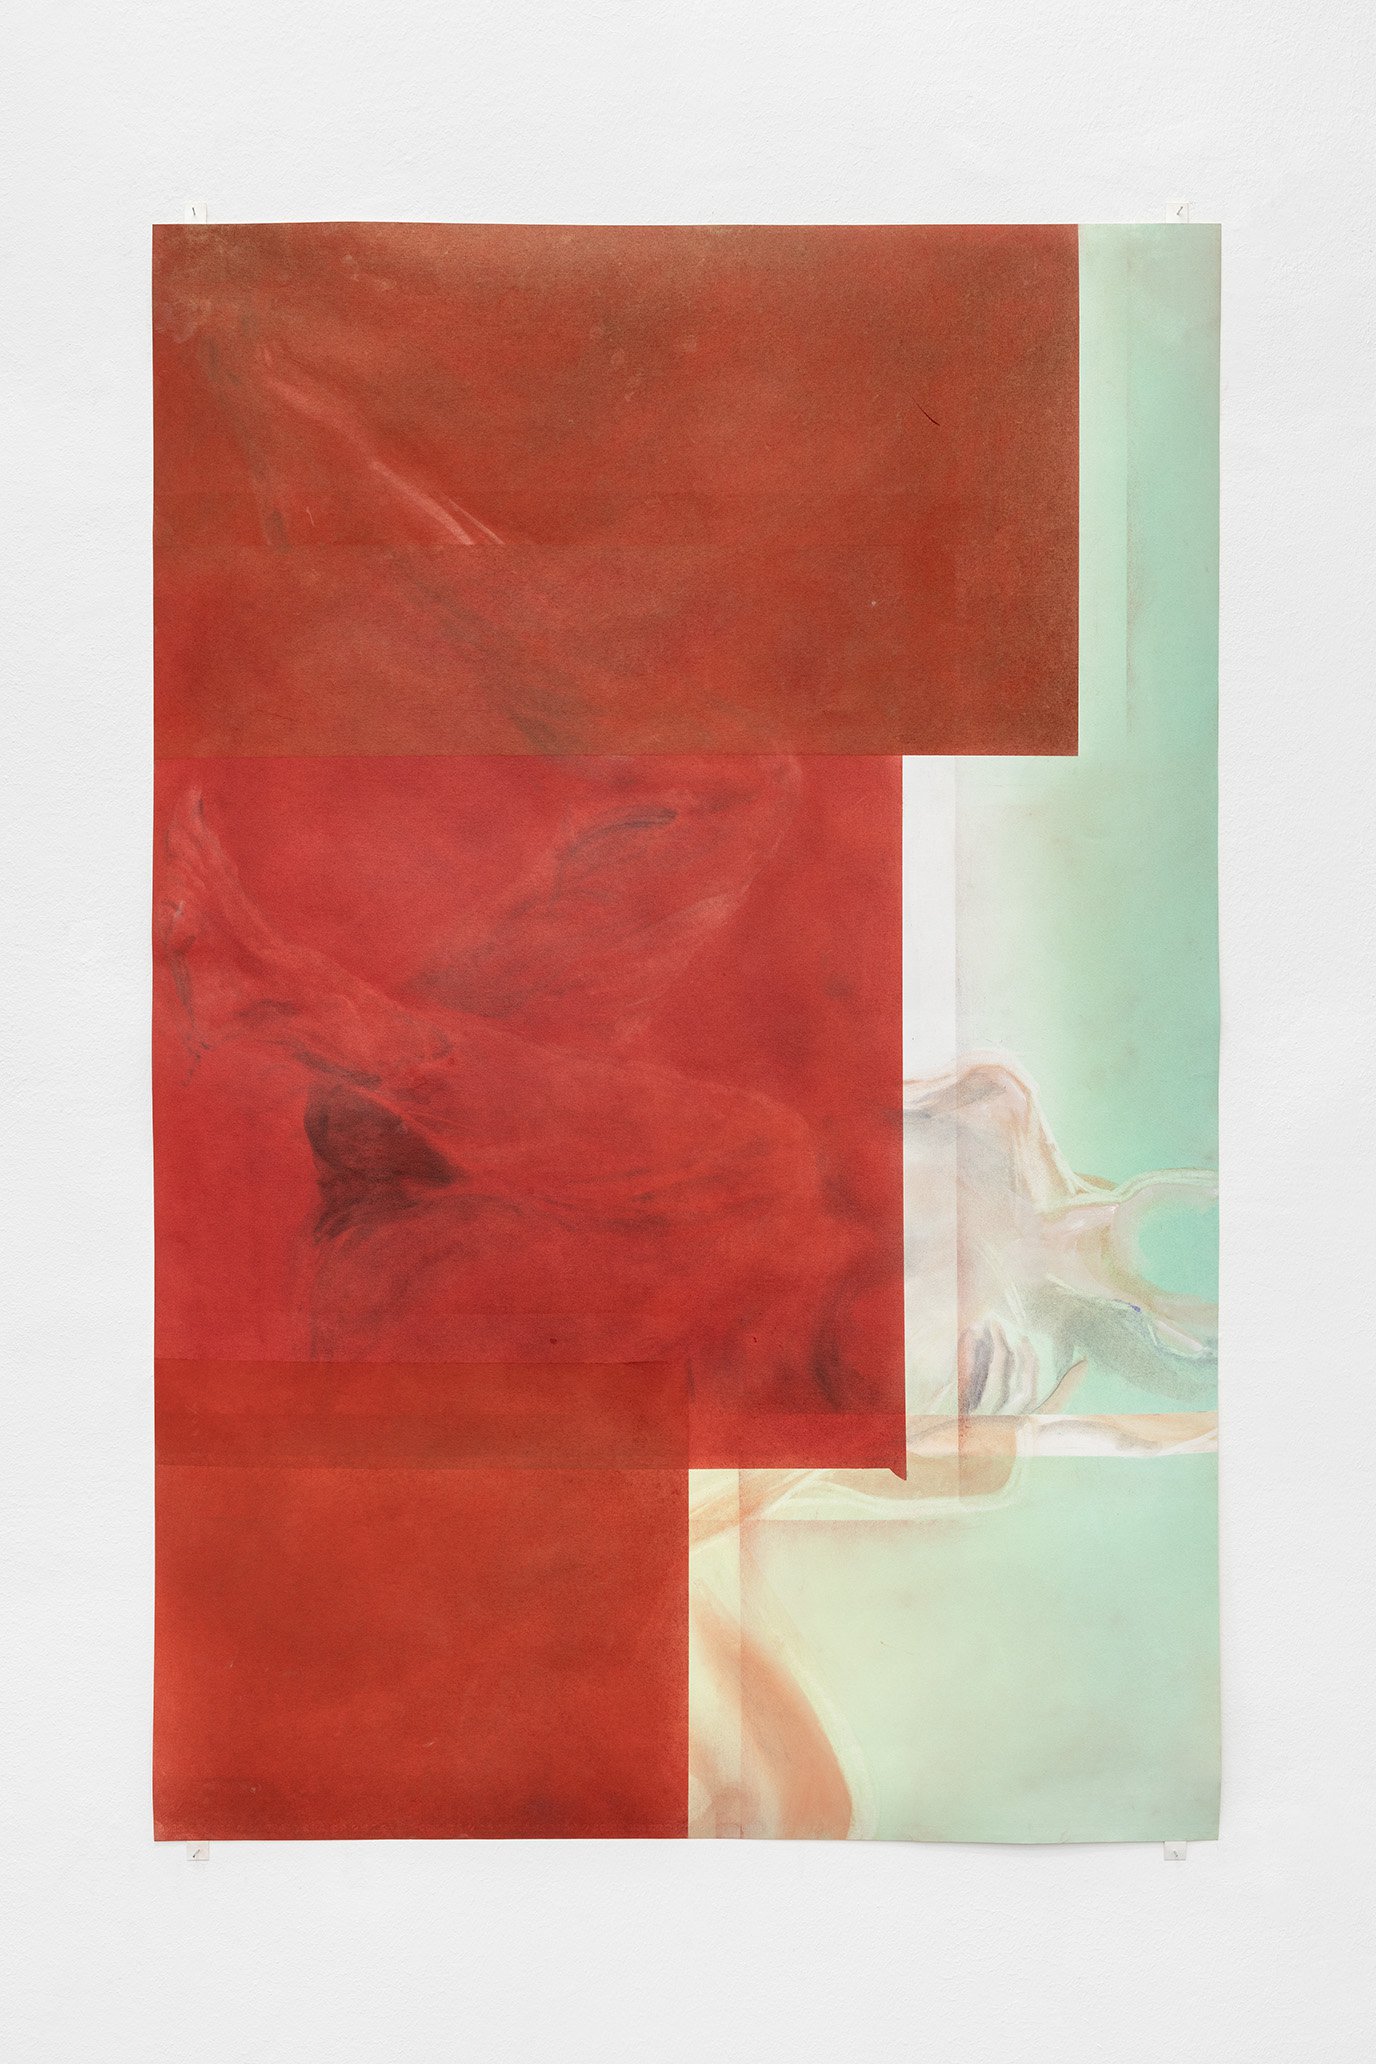 Evelyn PlaschgSlope (Pool), 2021Pigment on paper149.5 x 98.5 cm